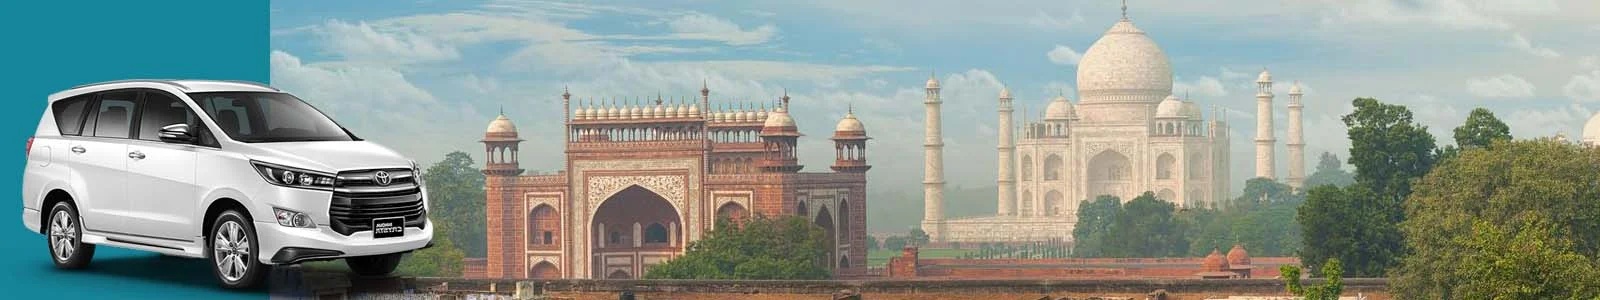 Same Day Agra Private Tour from New Delhi by private Car